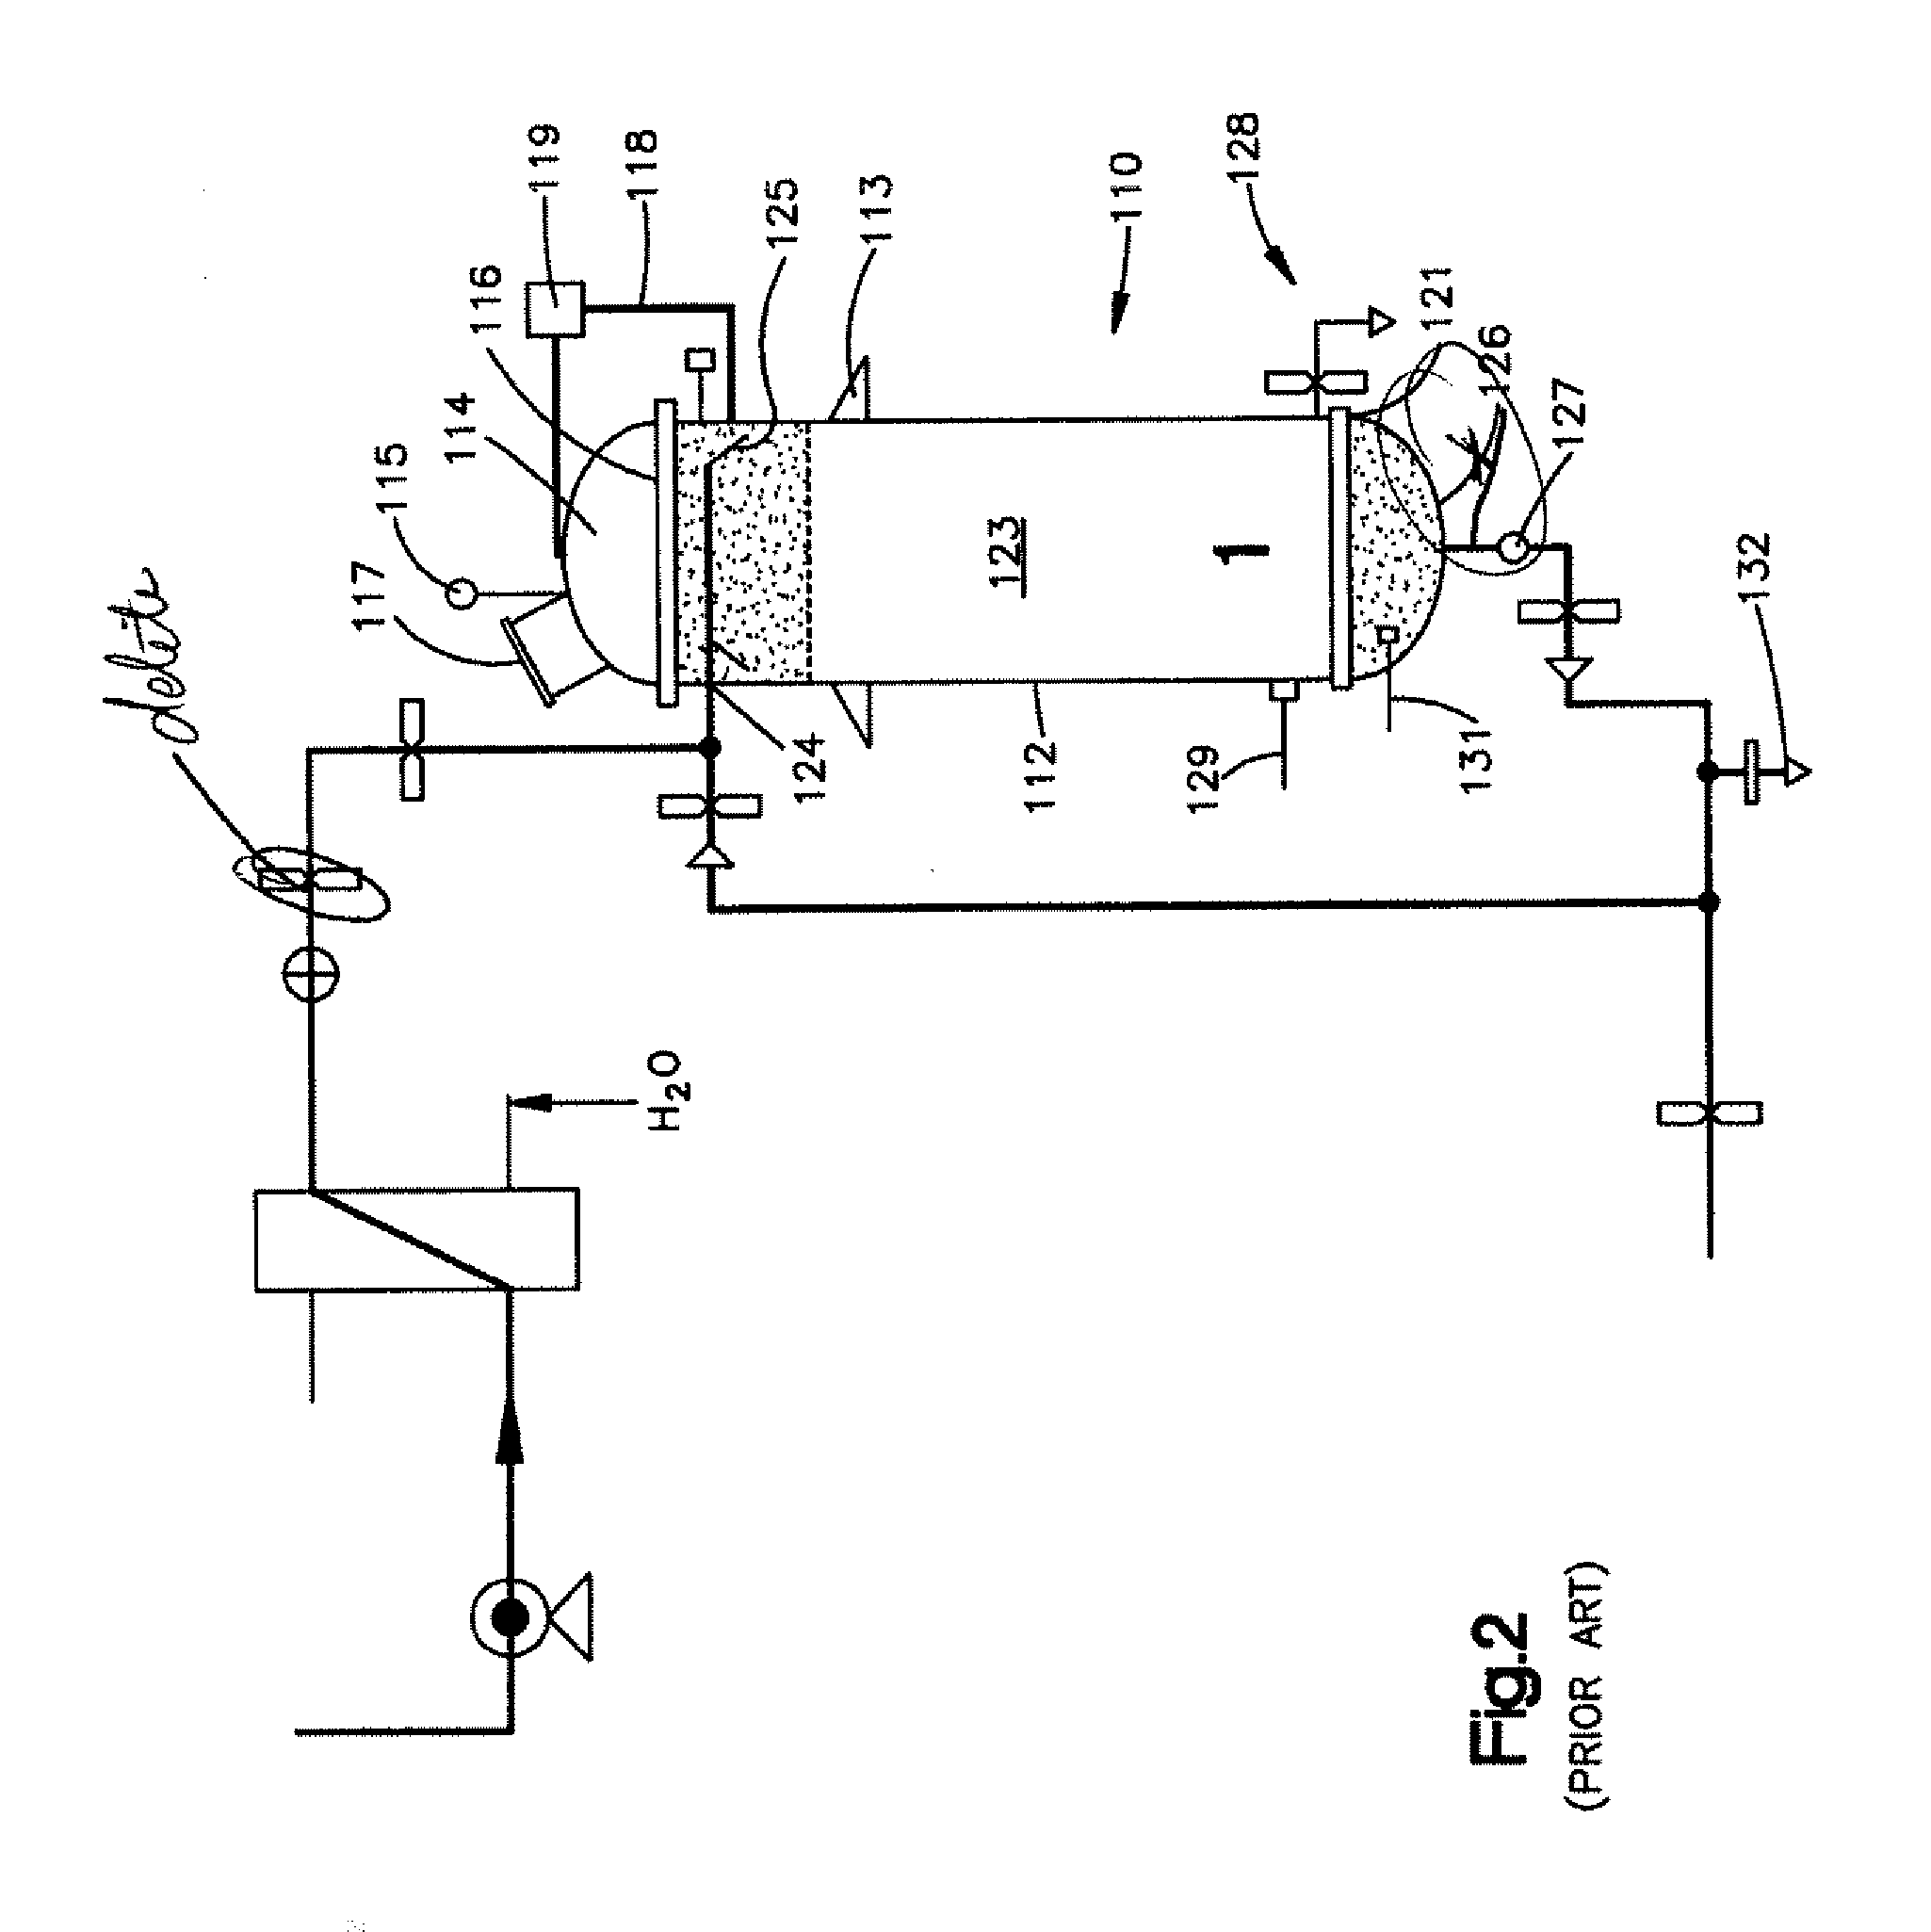 Continuous process and apparatus for enzymatic treatment of lipids